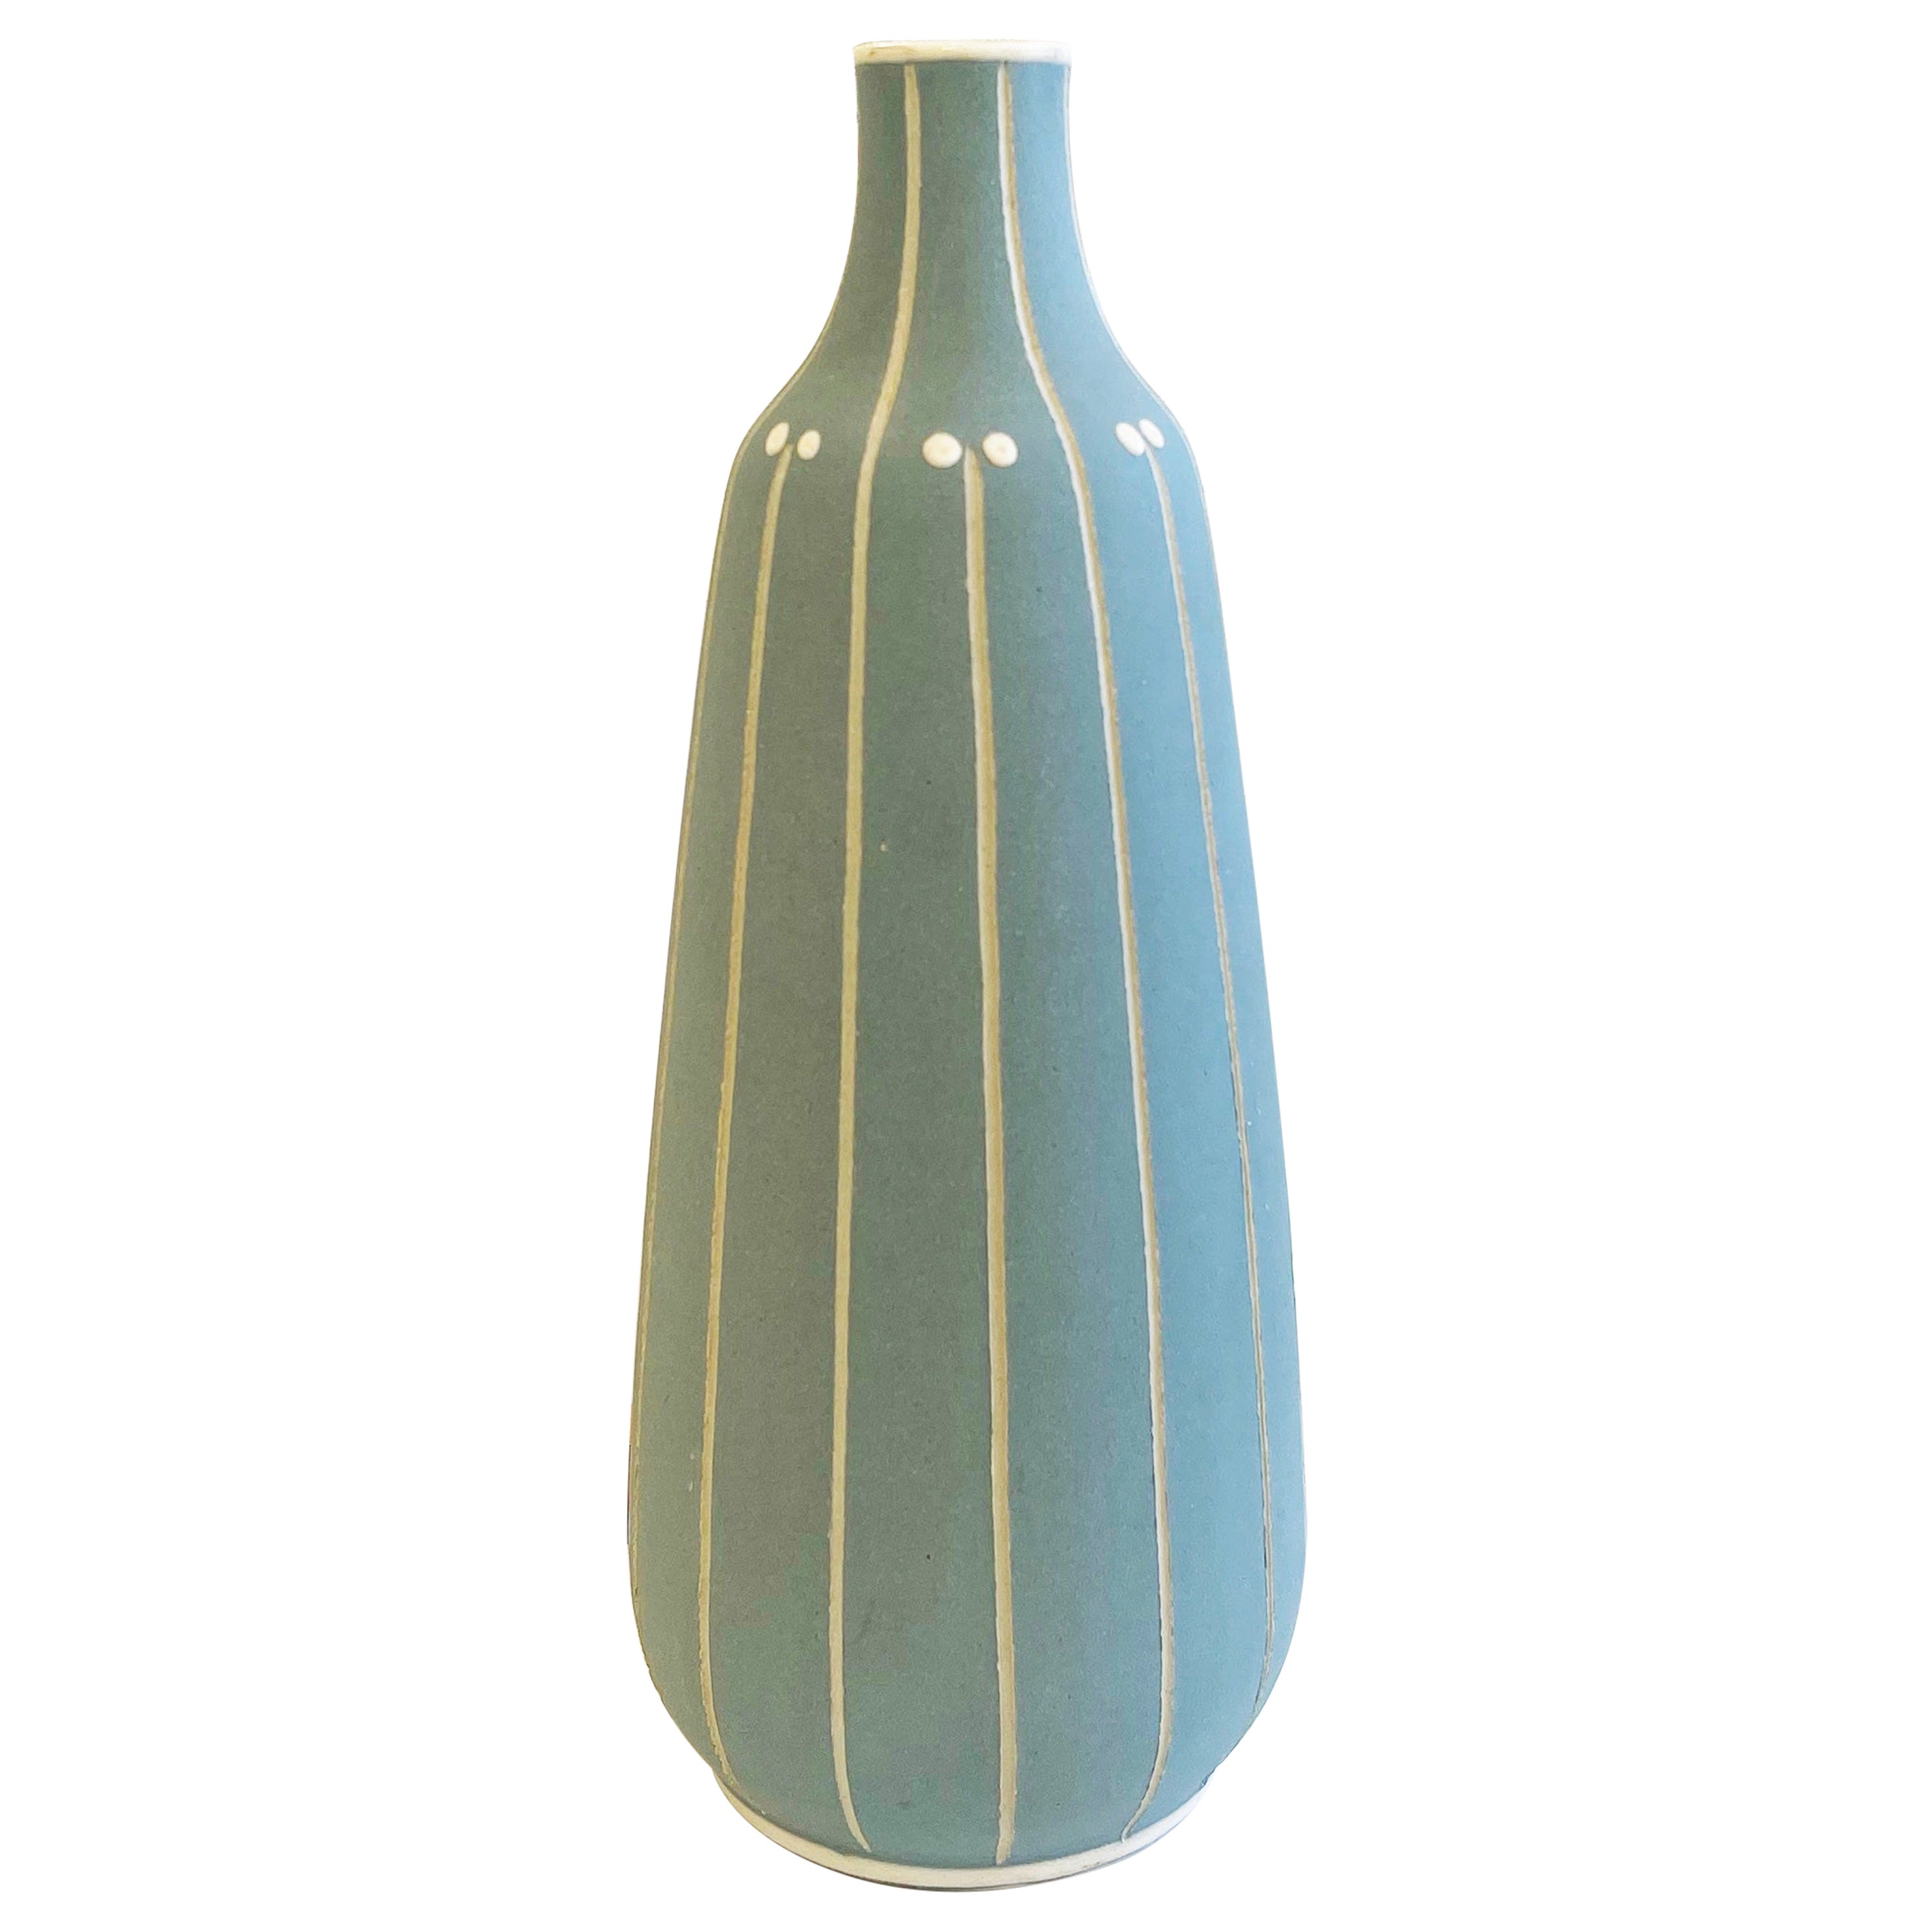 Art Deco Vase by Carl Fischer Incised Decor, Pastel Turquoise, 1920's, Germany For Sale